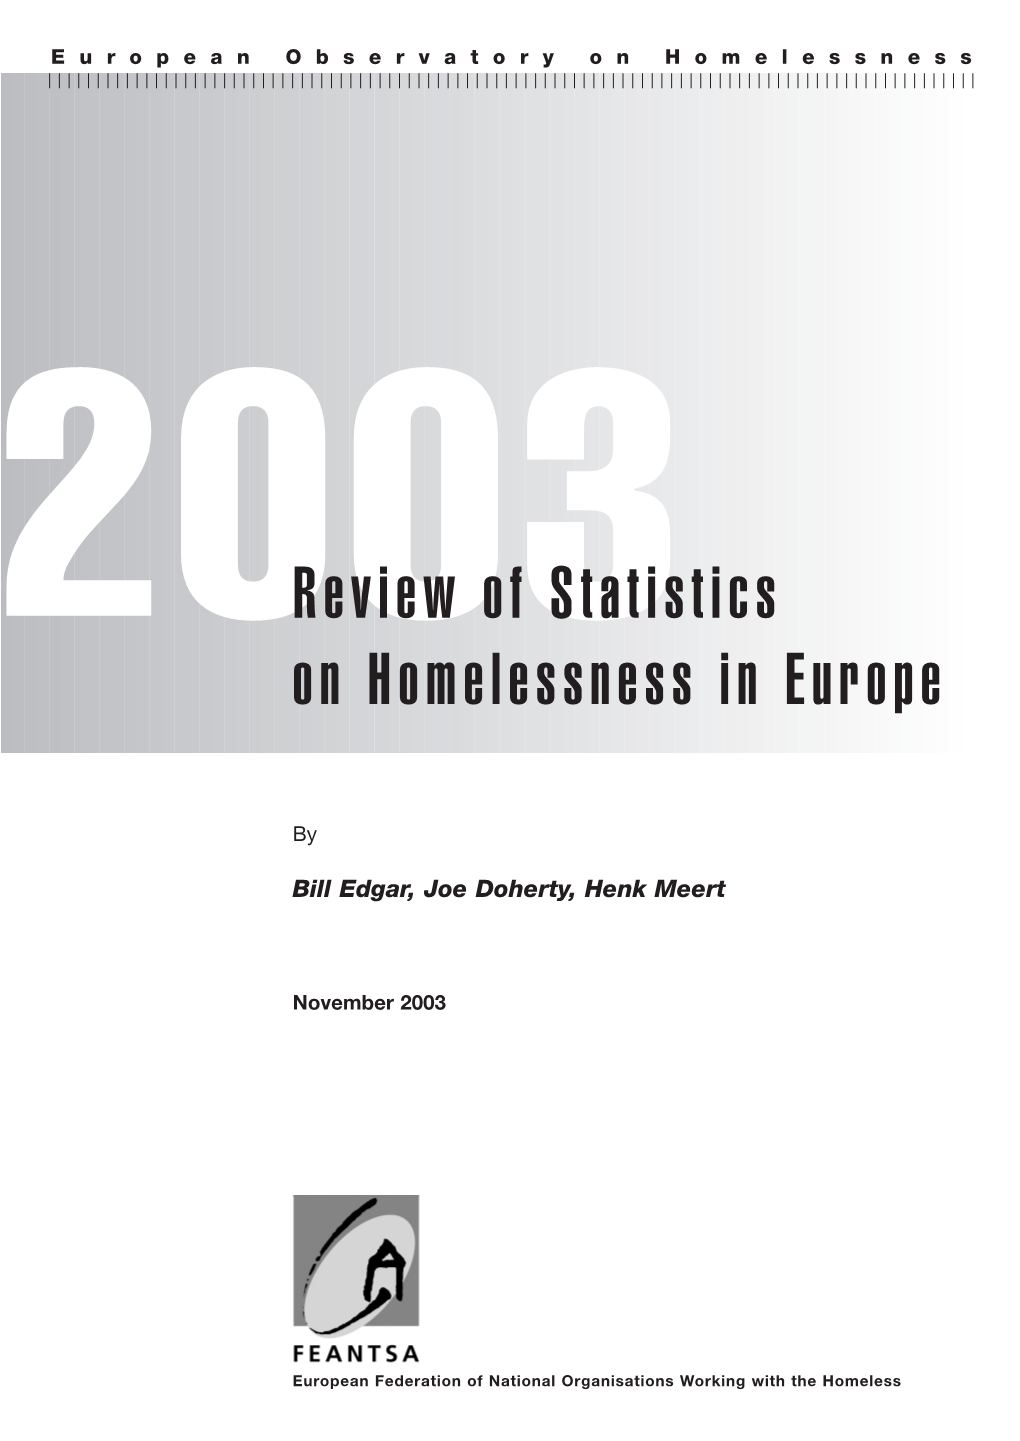 2003Review of Statistics on Homelessness in Europe